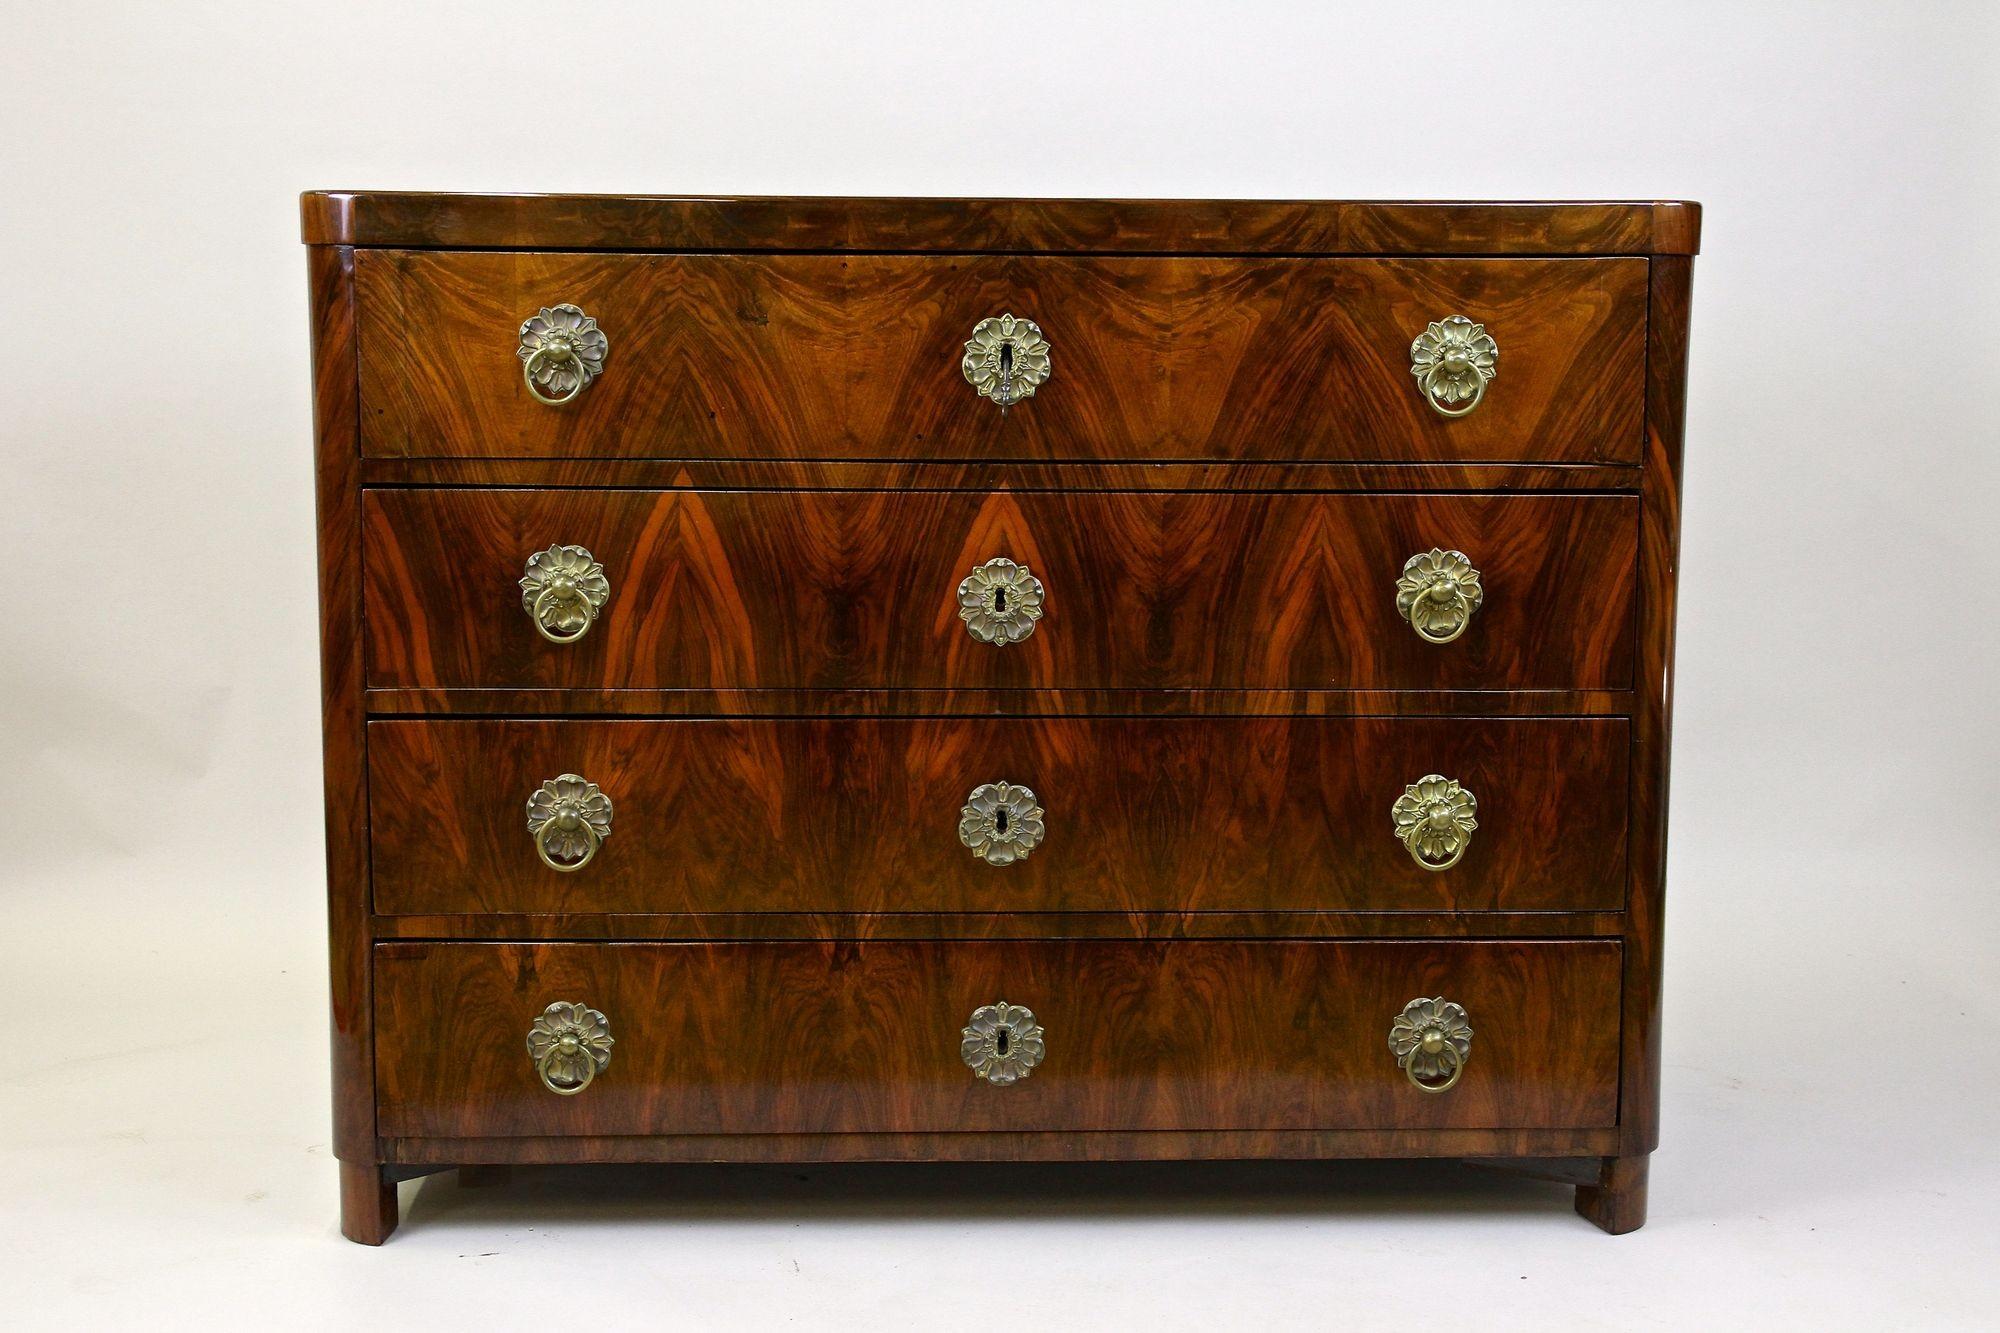 Remarkable 19th century nutwood chest of drawers/ writing commode from the early Biedermeier era in Austria around 1830. Impressing with an absolute outstanding looking grain which runs down from top to bottom without any interruption, this